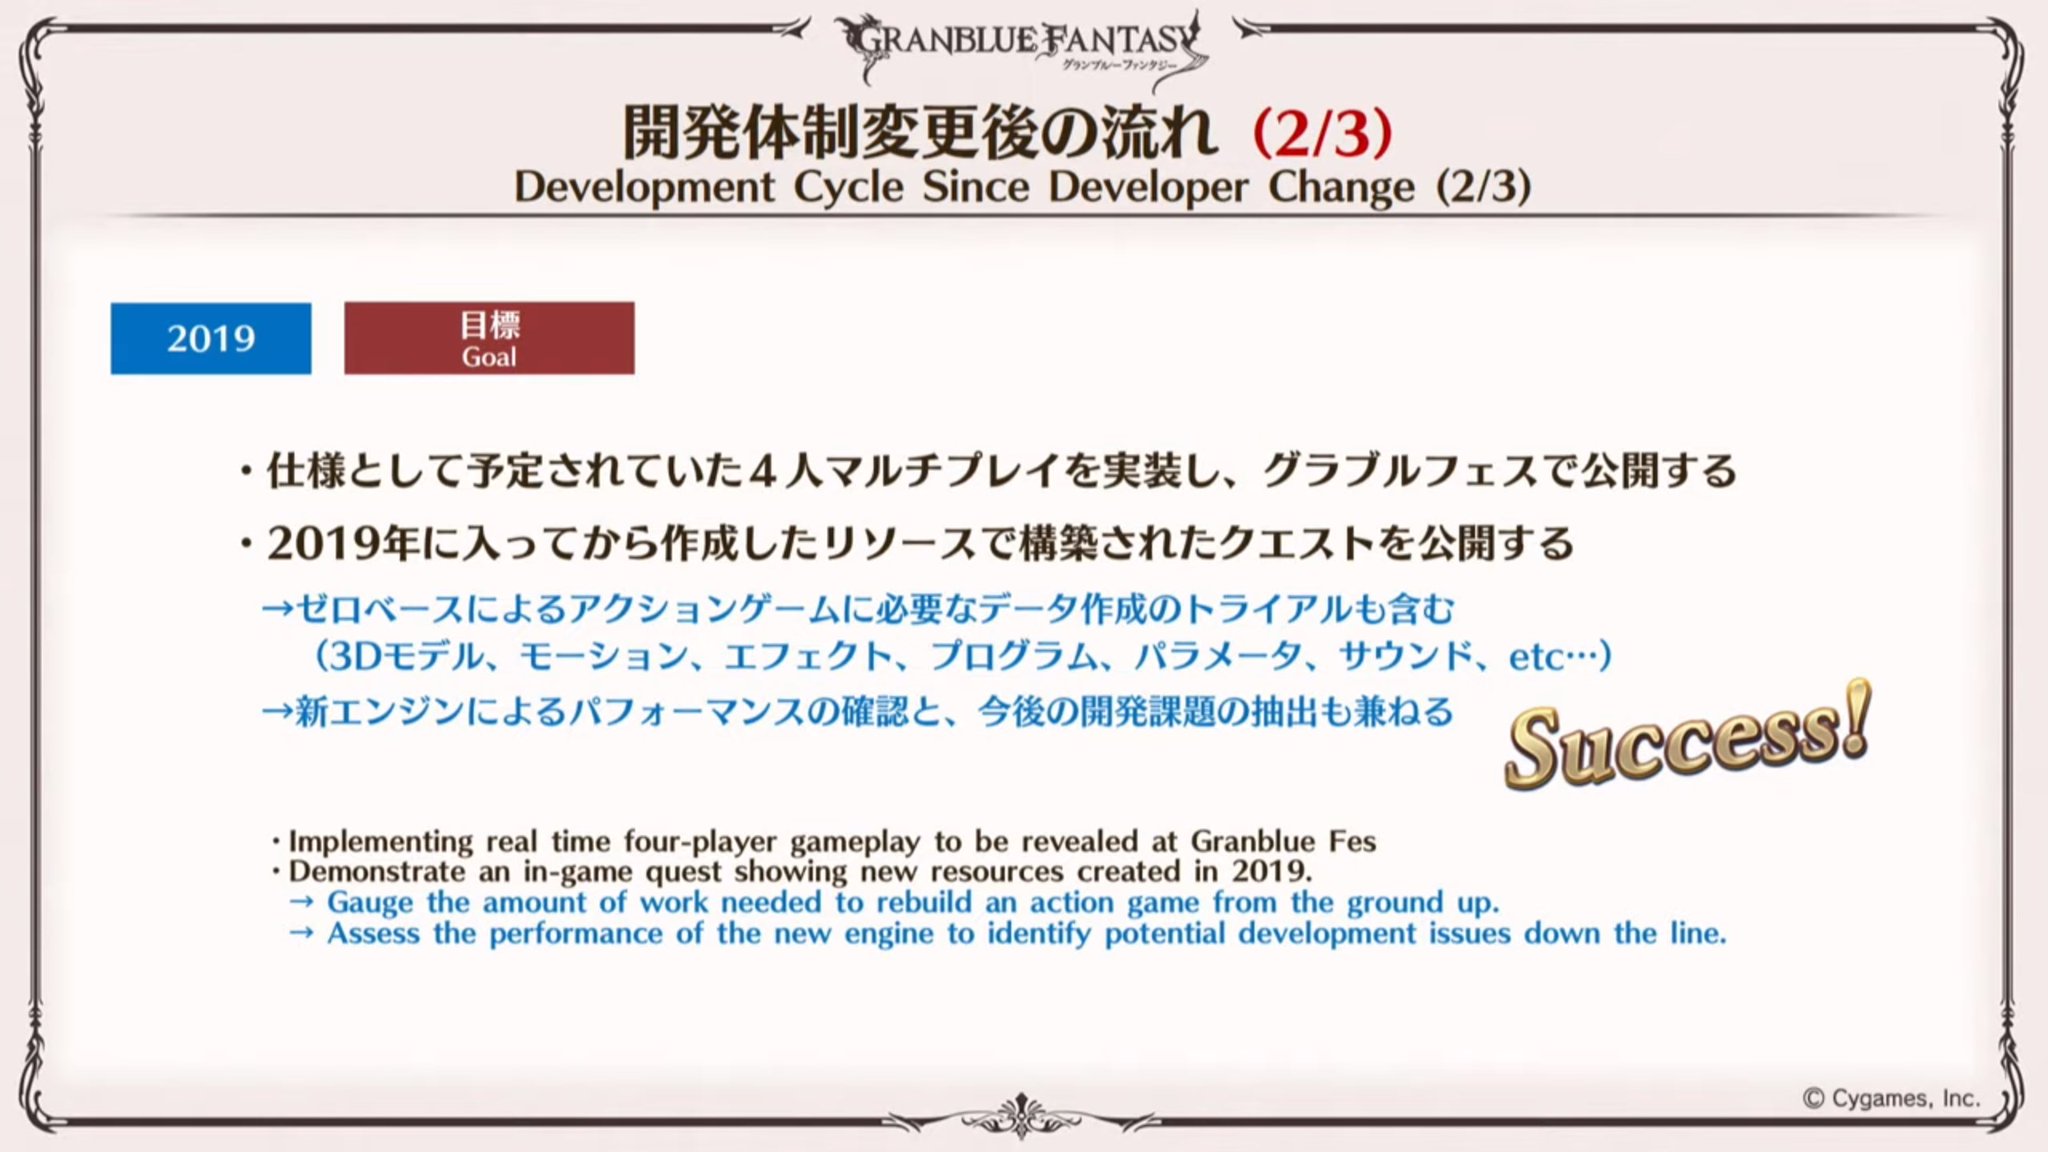 Granblue En Unofficial Fkhr Covers How The Development Has Changed Since The Game Changed Development Studios